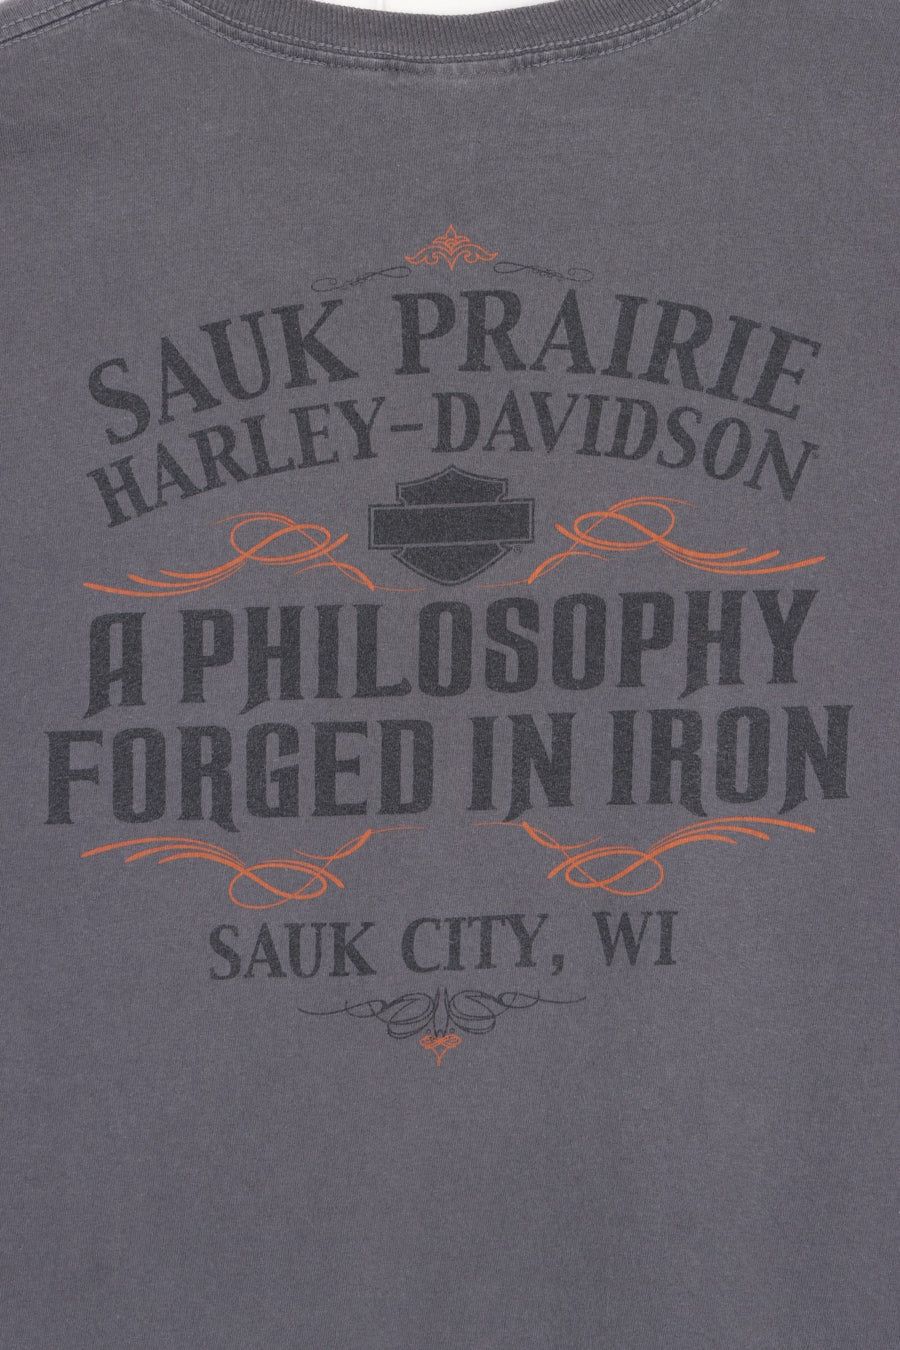 HARLEY DAVIDSON "Philosophy Forged in Iron" Front Back Tee (XL)